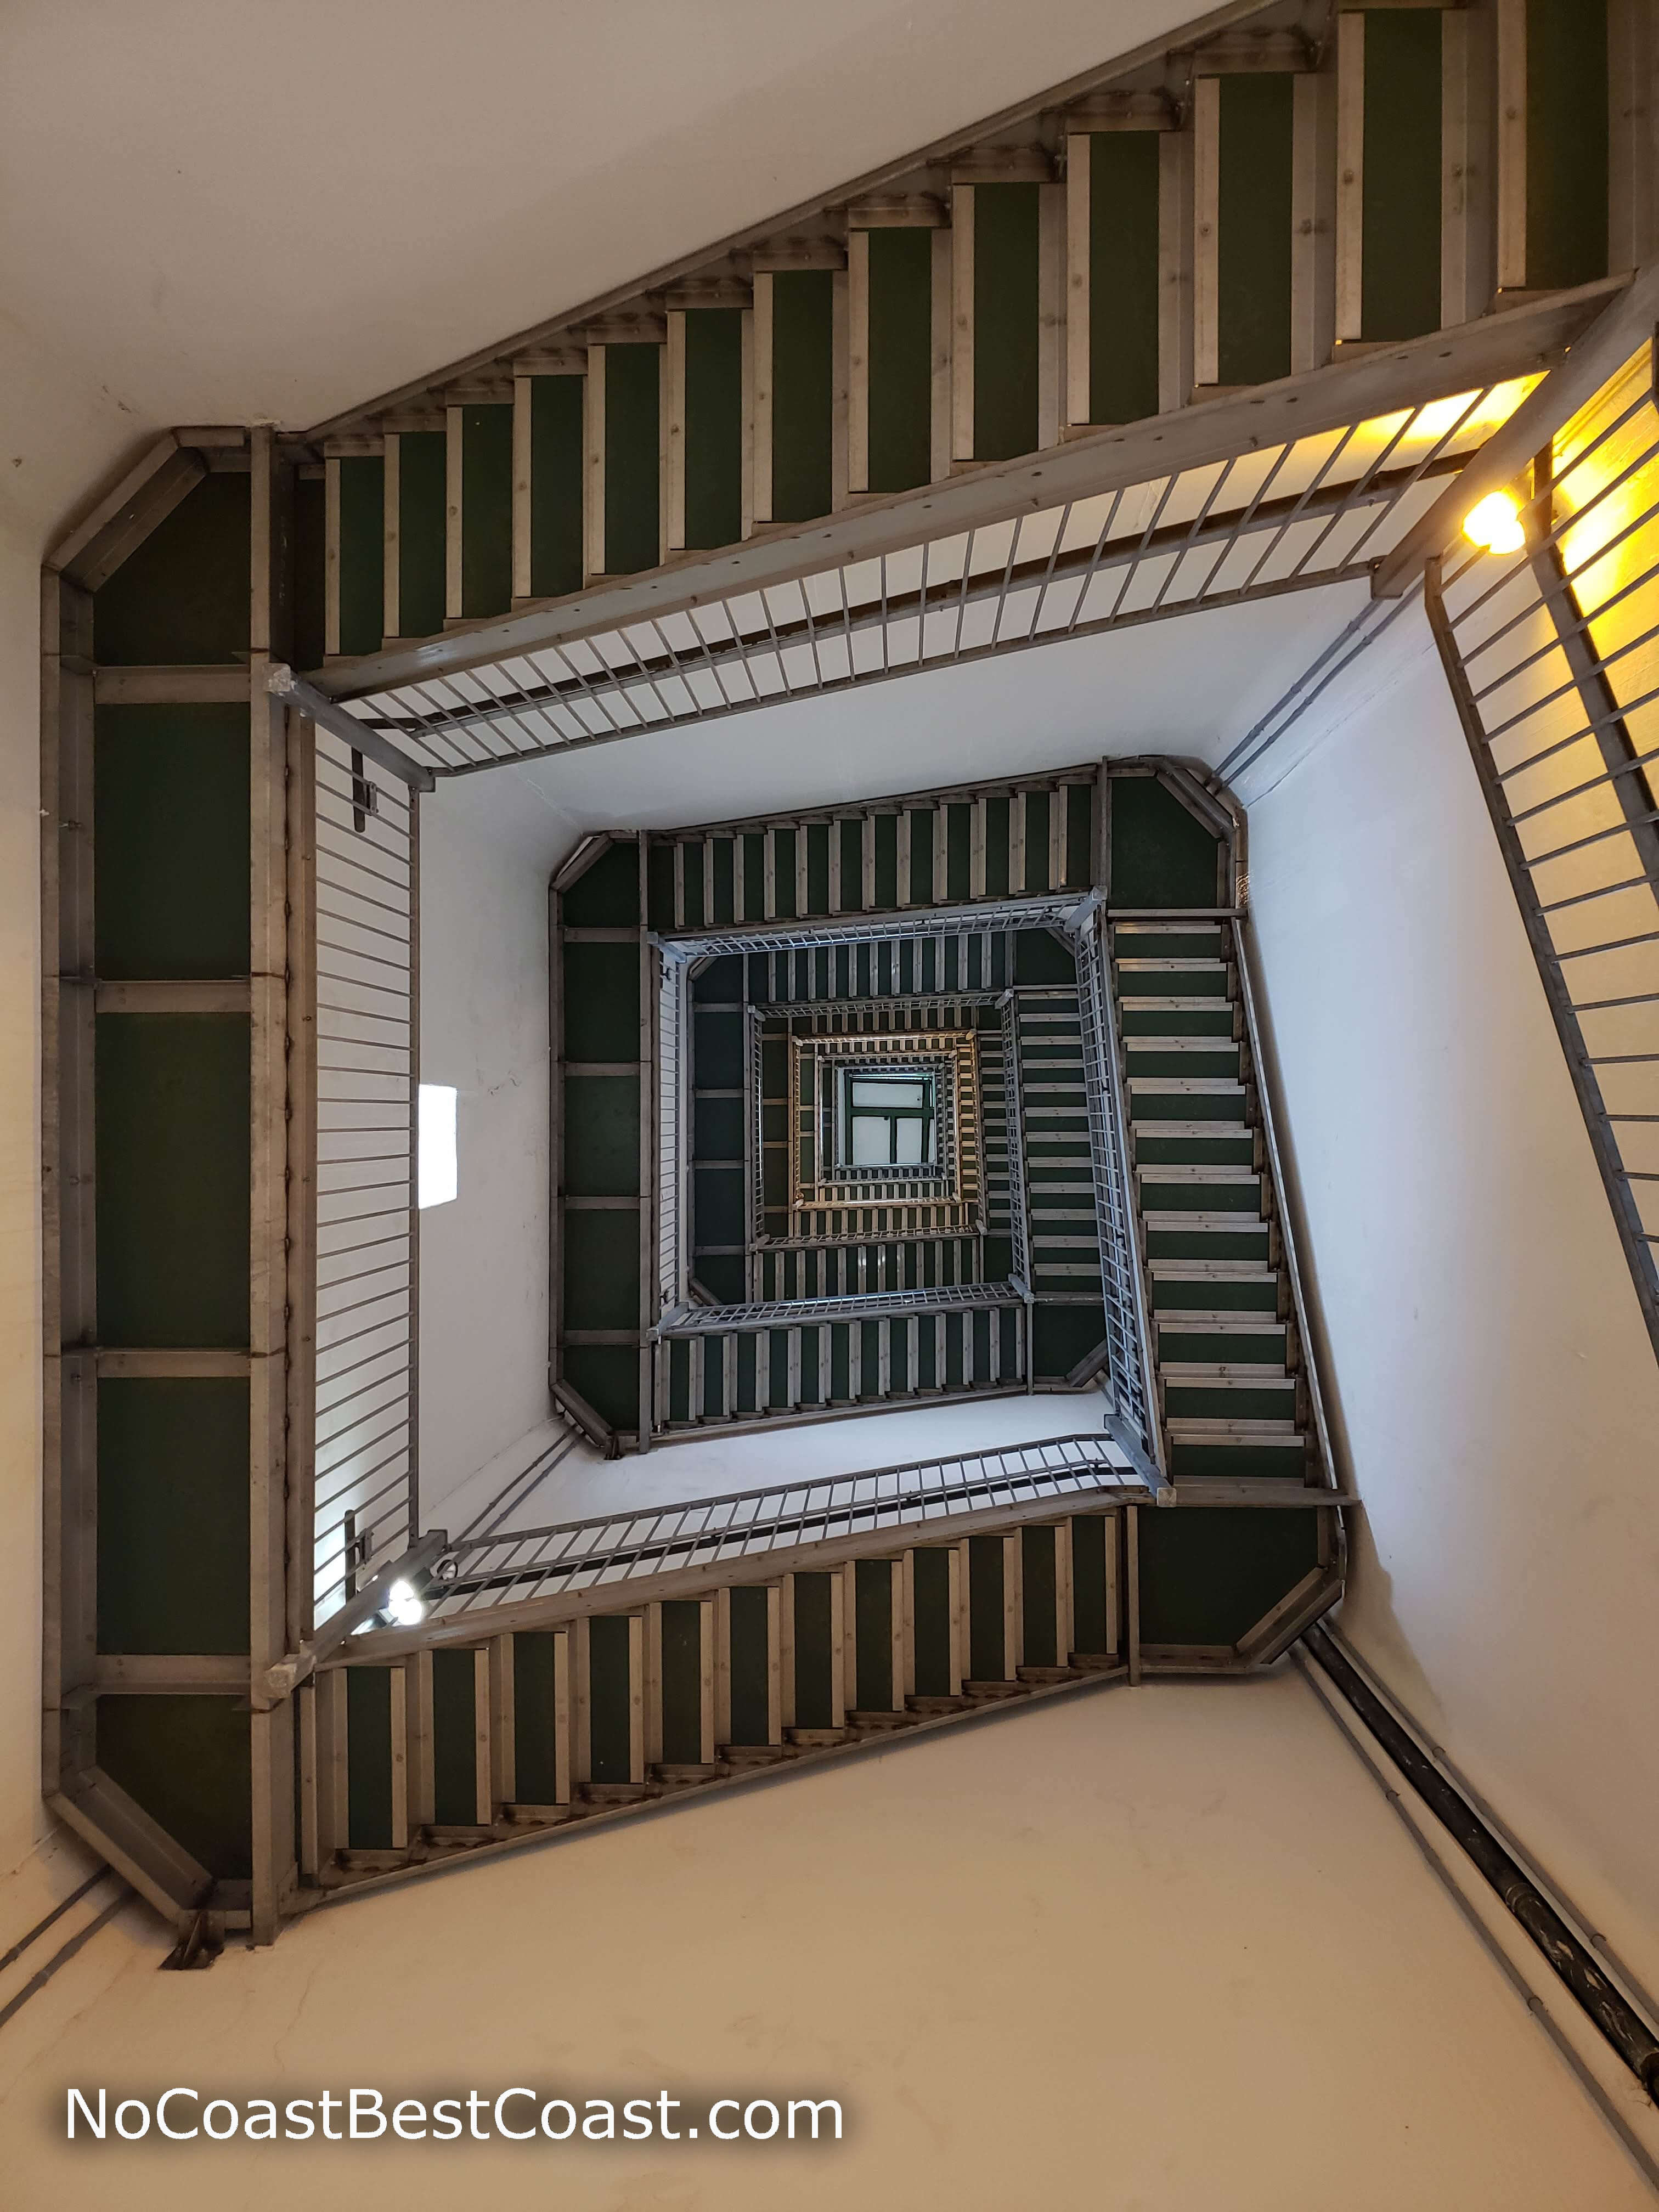 The dizzying spiral of stairs leading to the top of the monument